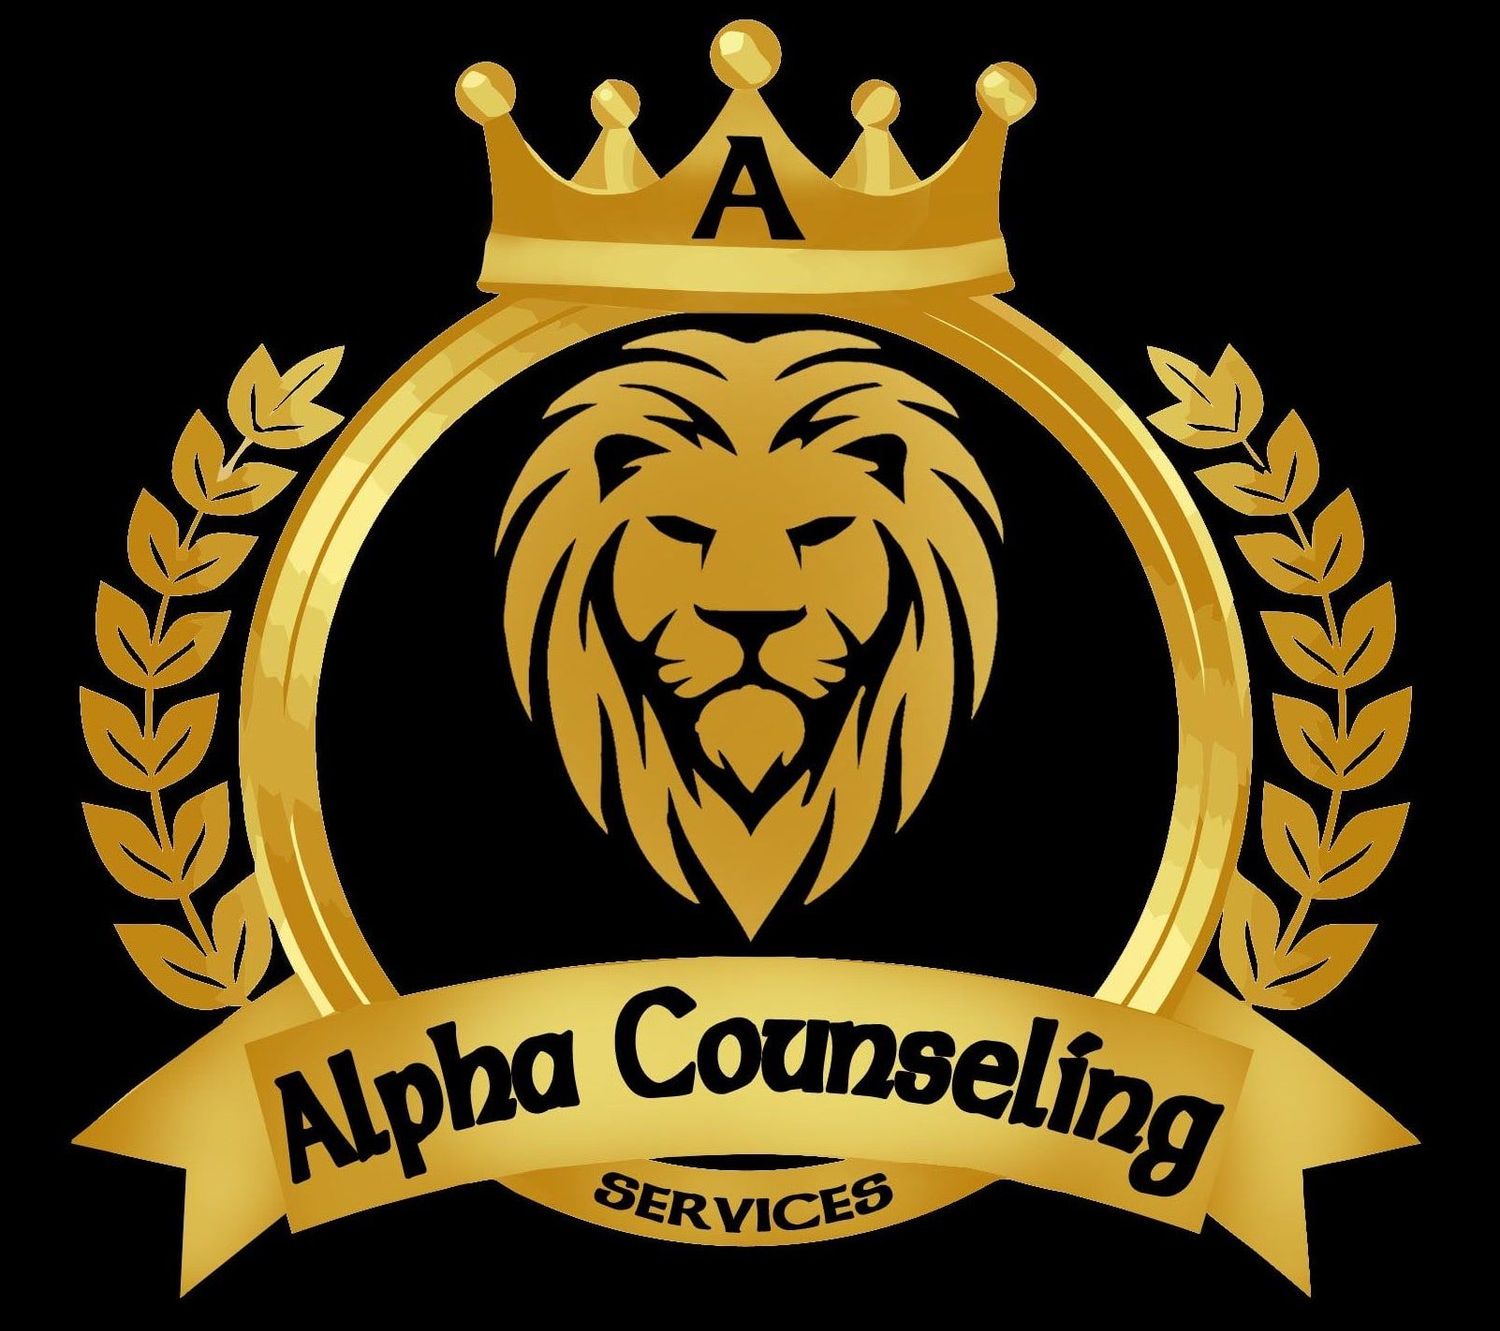 Gallery Photo of Alpha Counseling Services